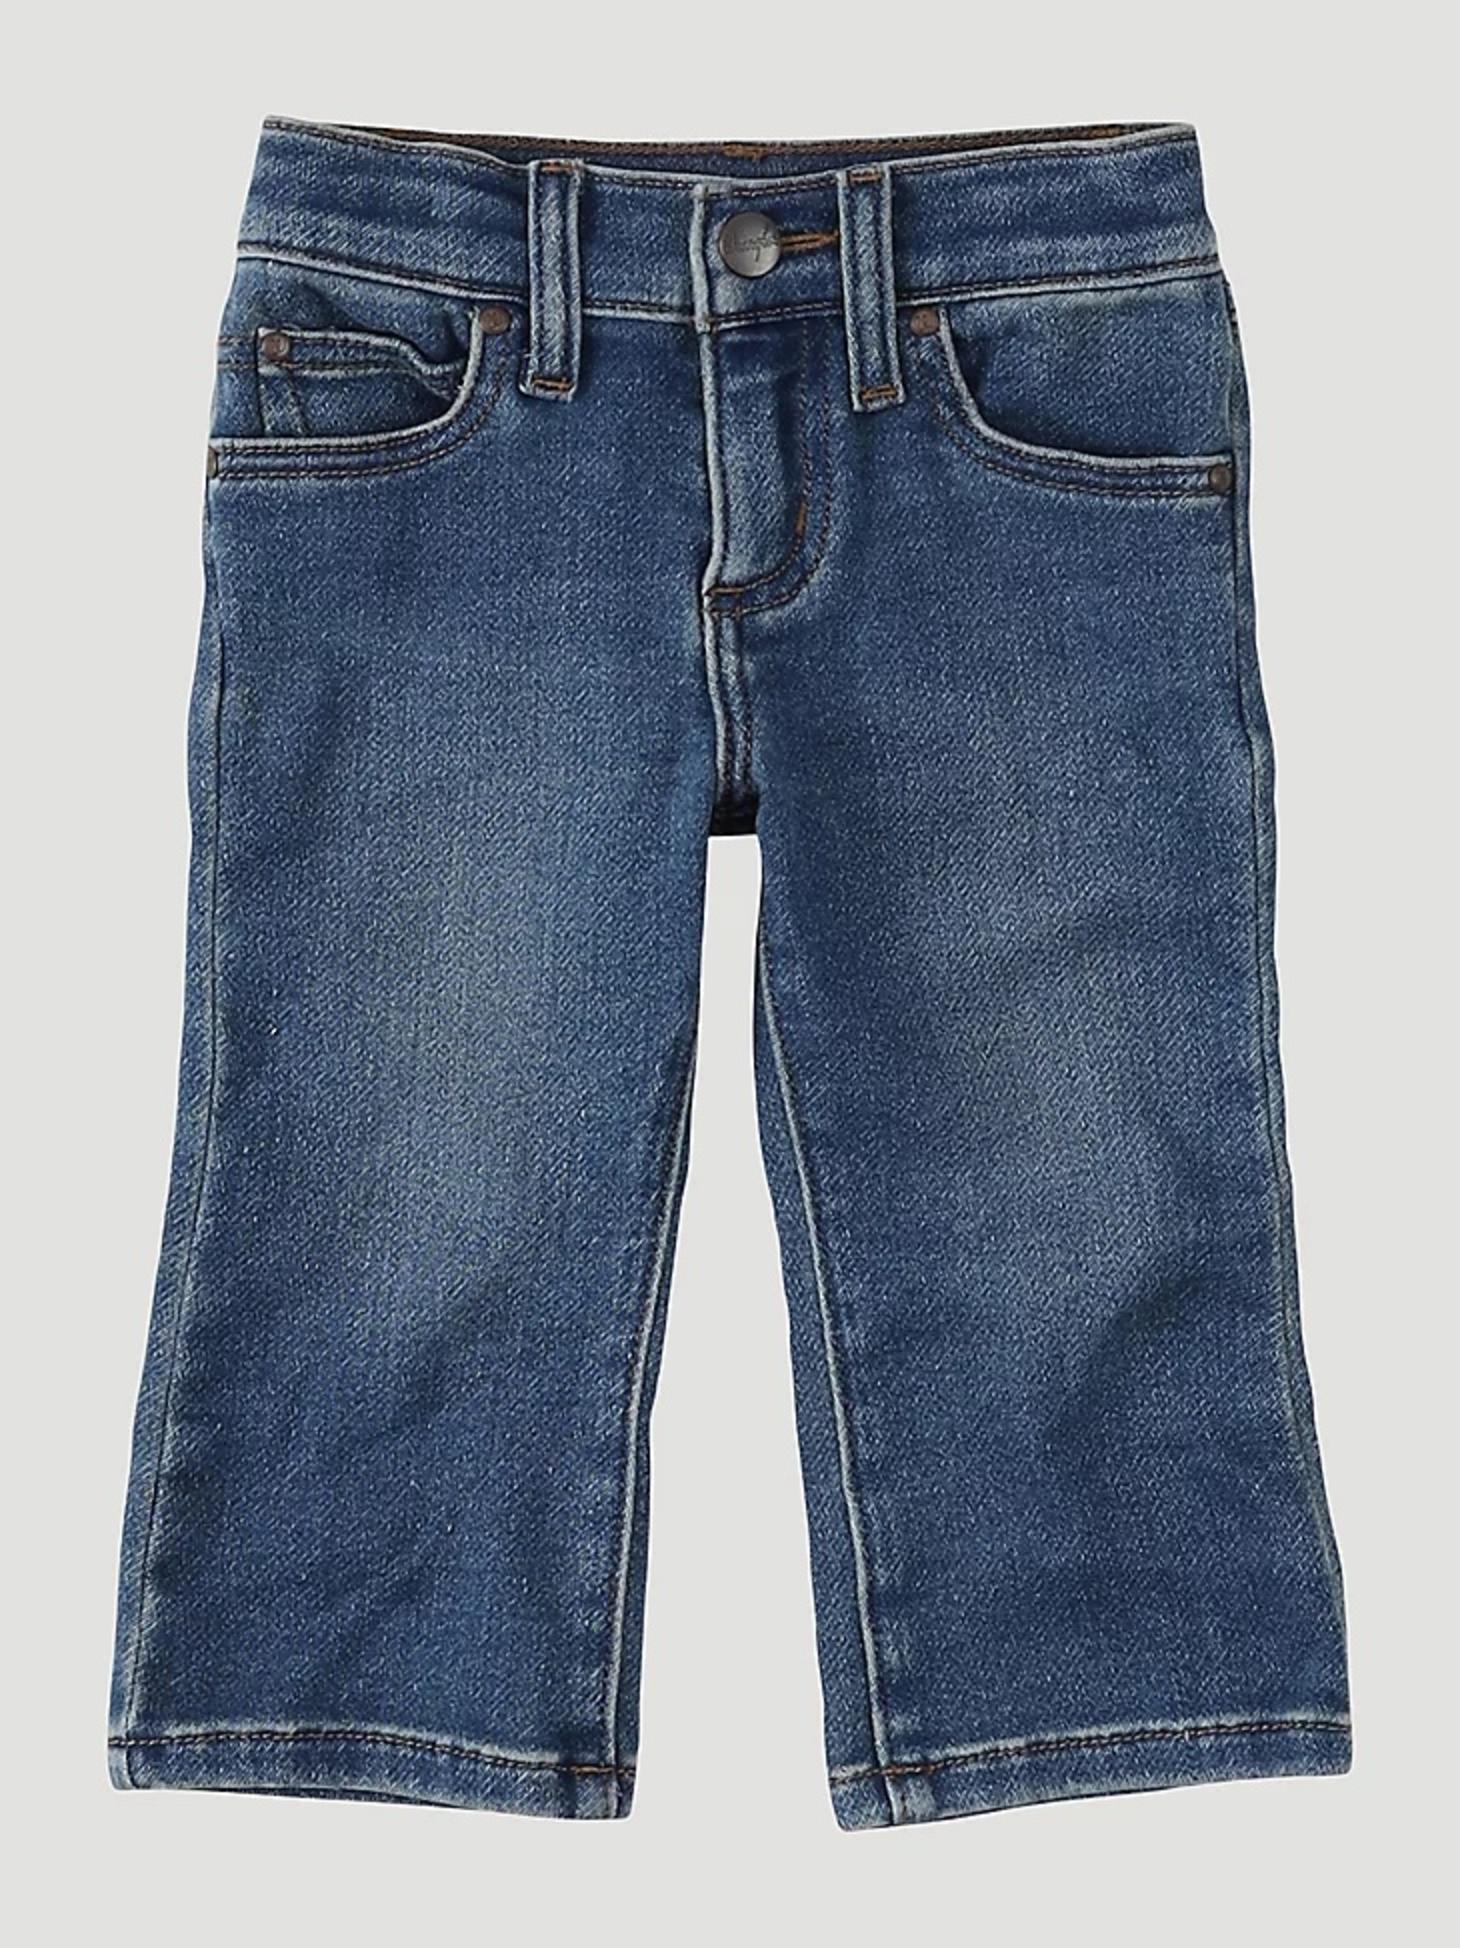  Little Boy's Stitched Pocket Bootcut Jean In Ropin' front view